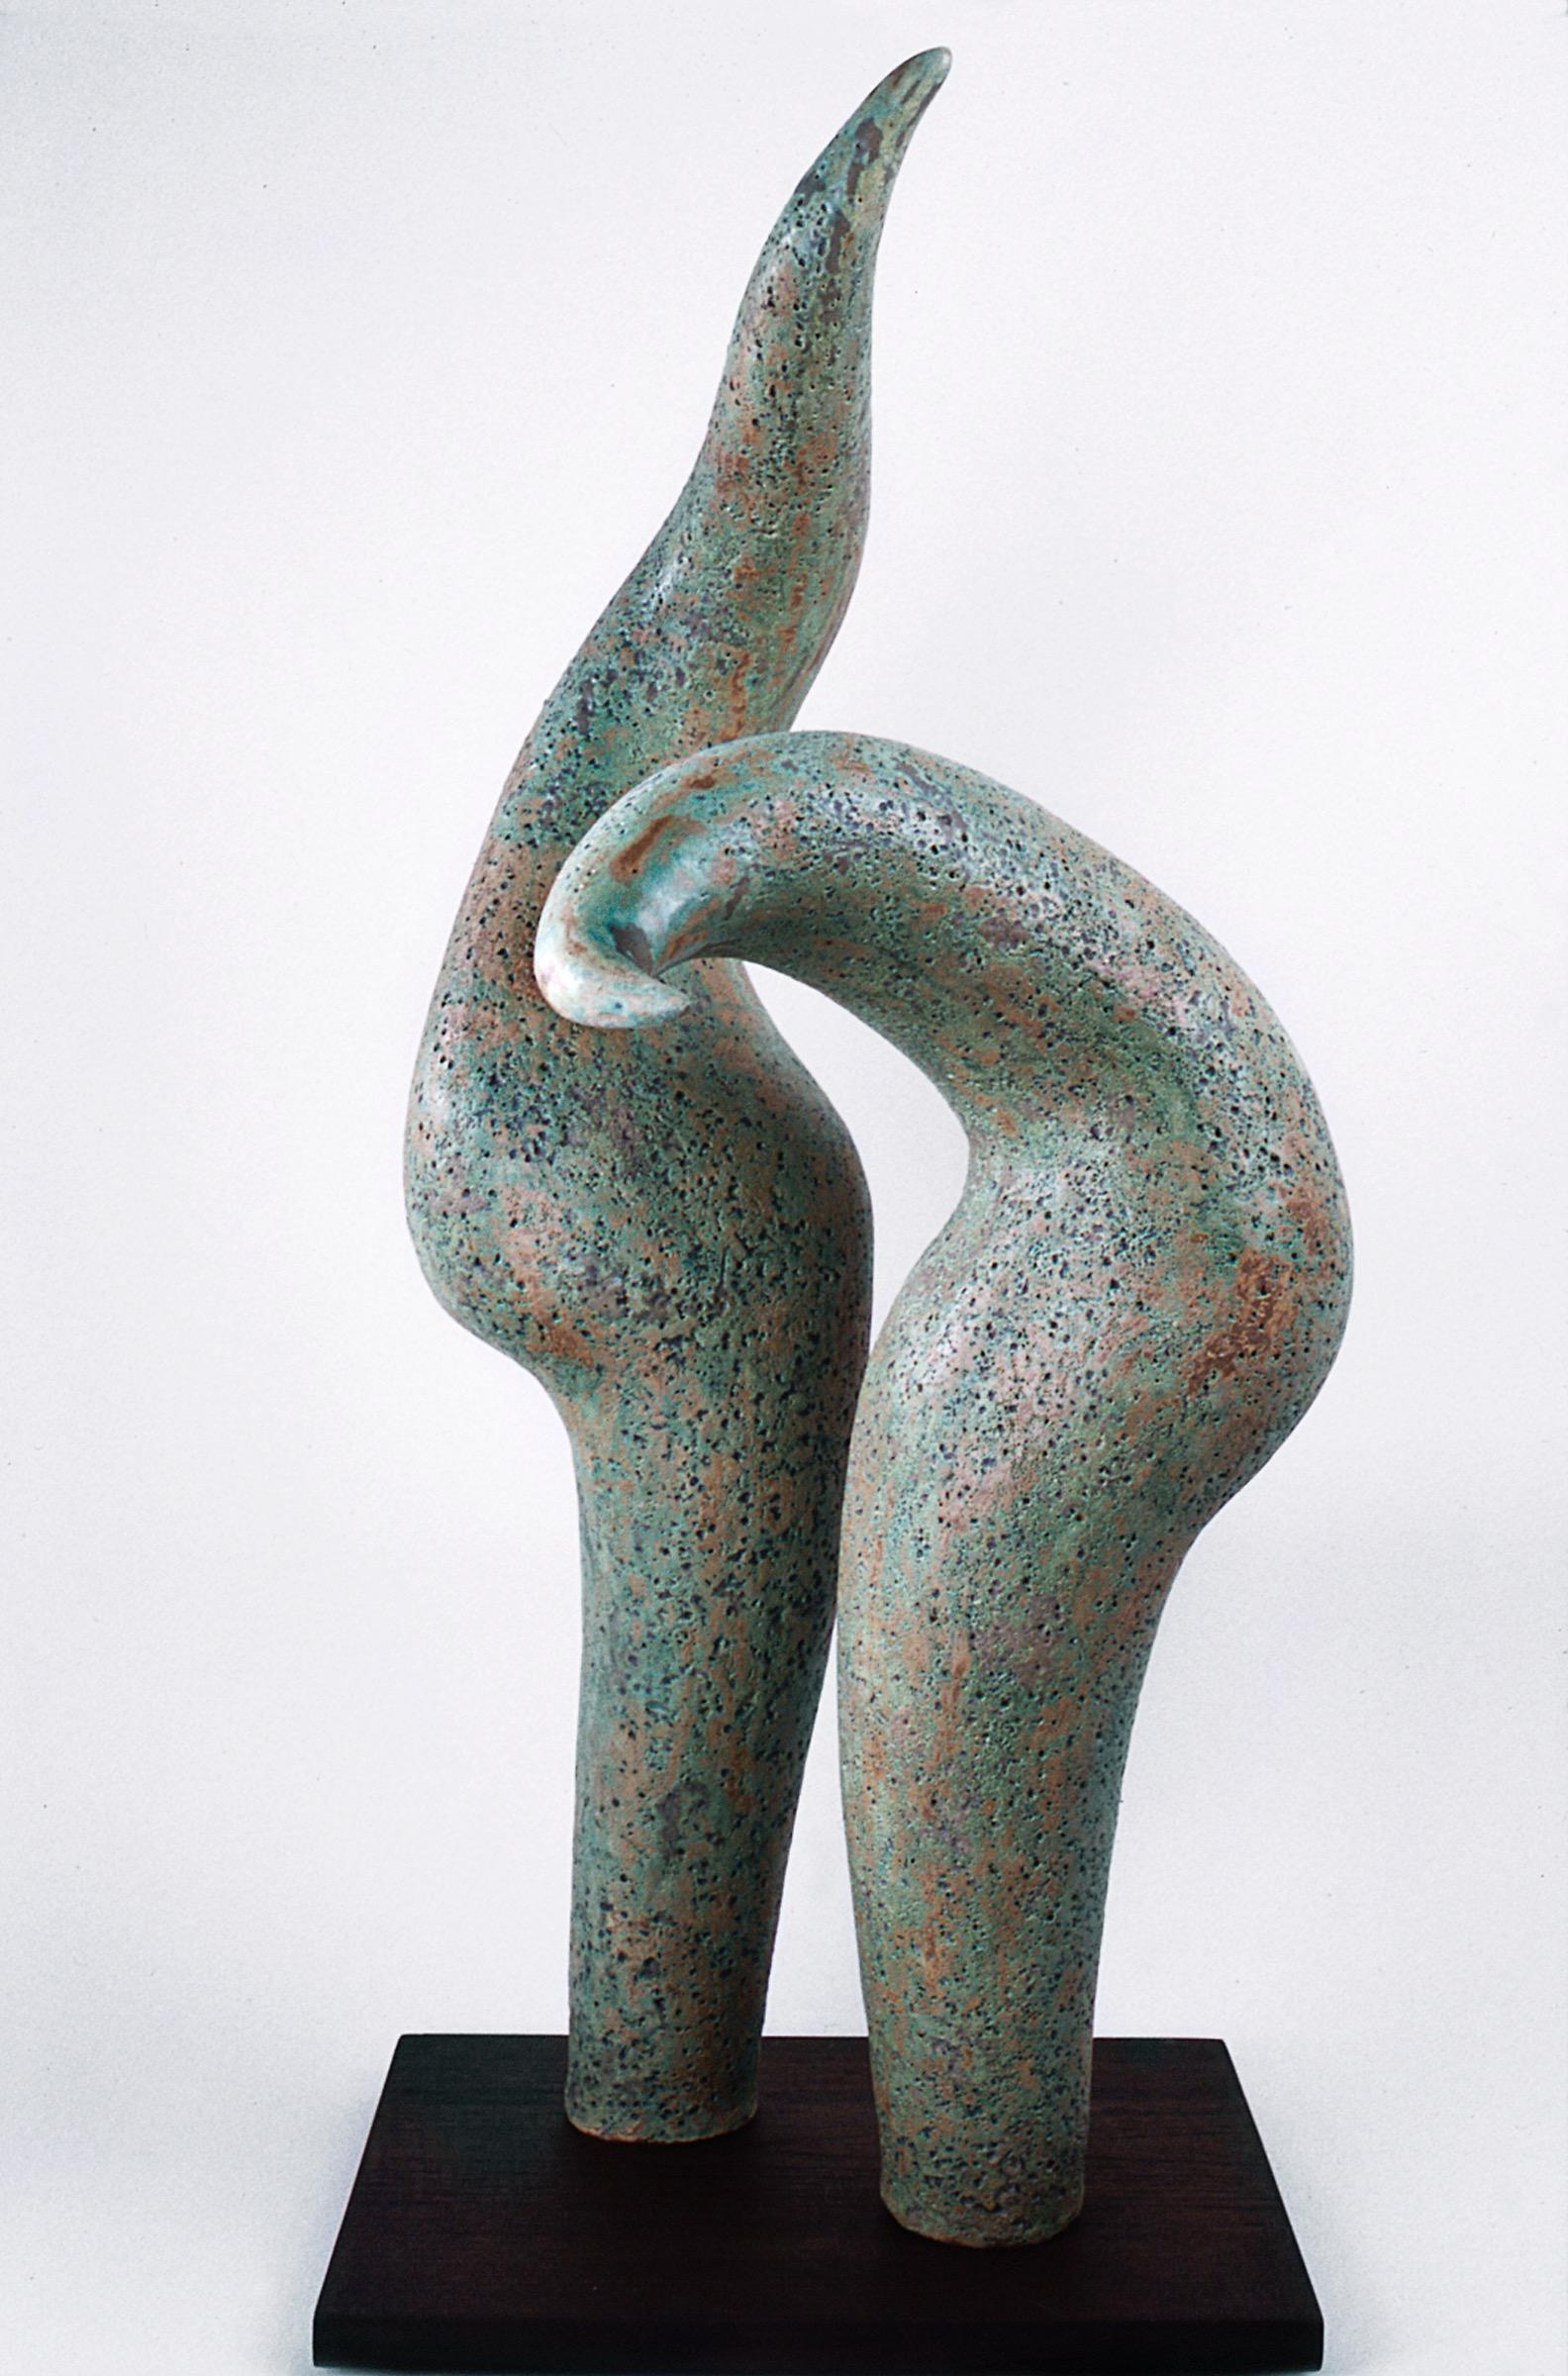 “Tête-a-Tête”, blue-green and brown ceramic sculpture of intimacy - Sculpture by Elaine Lorenz